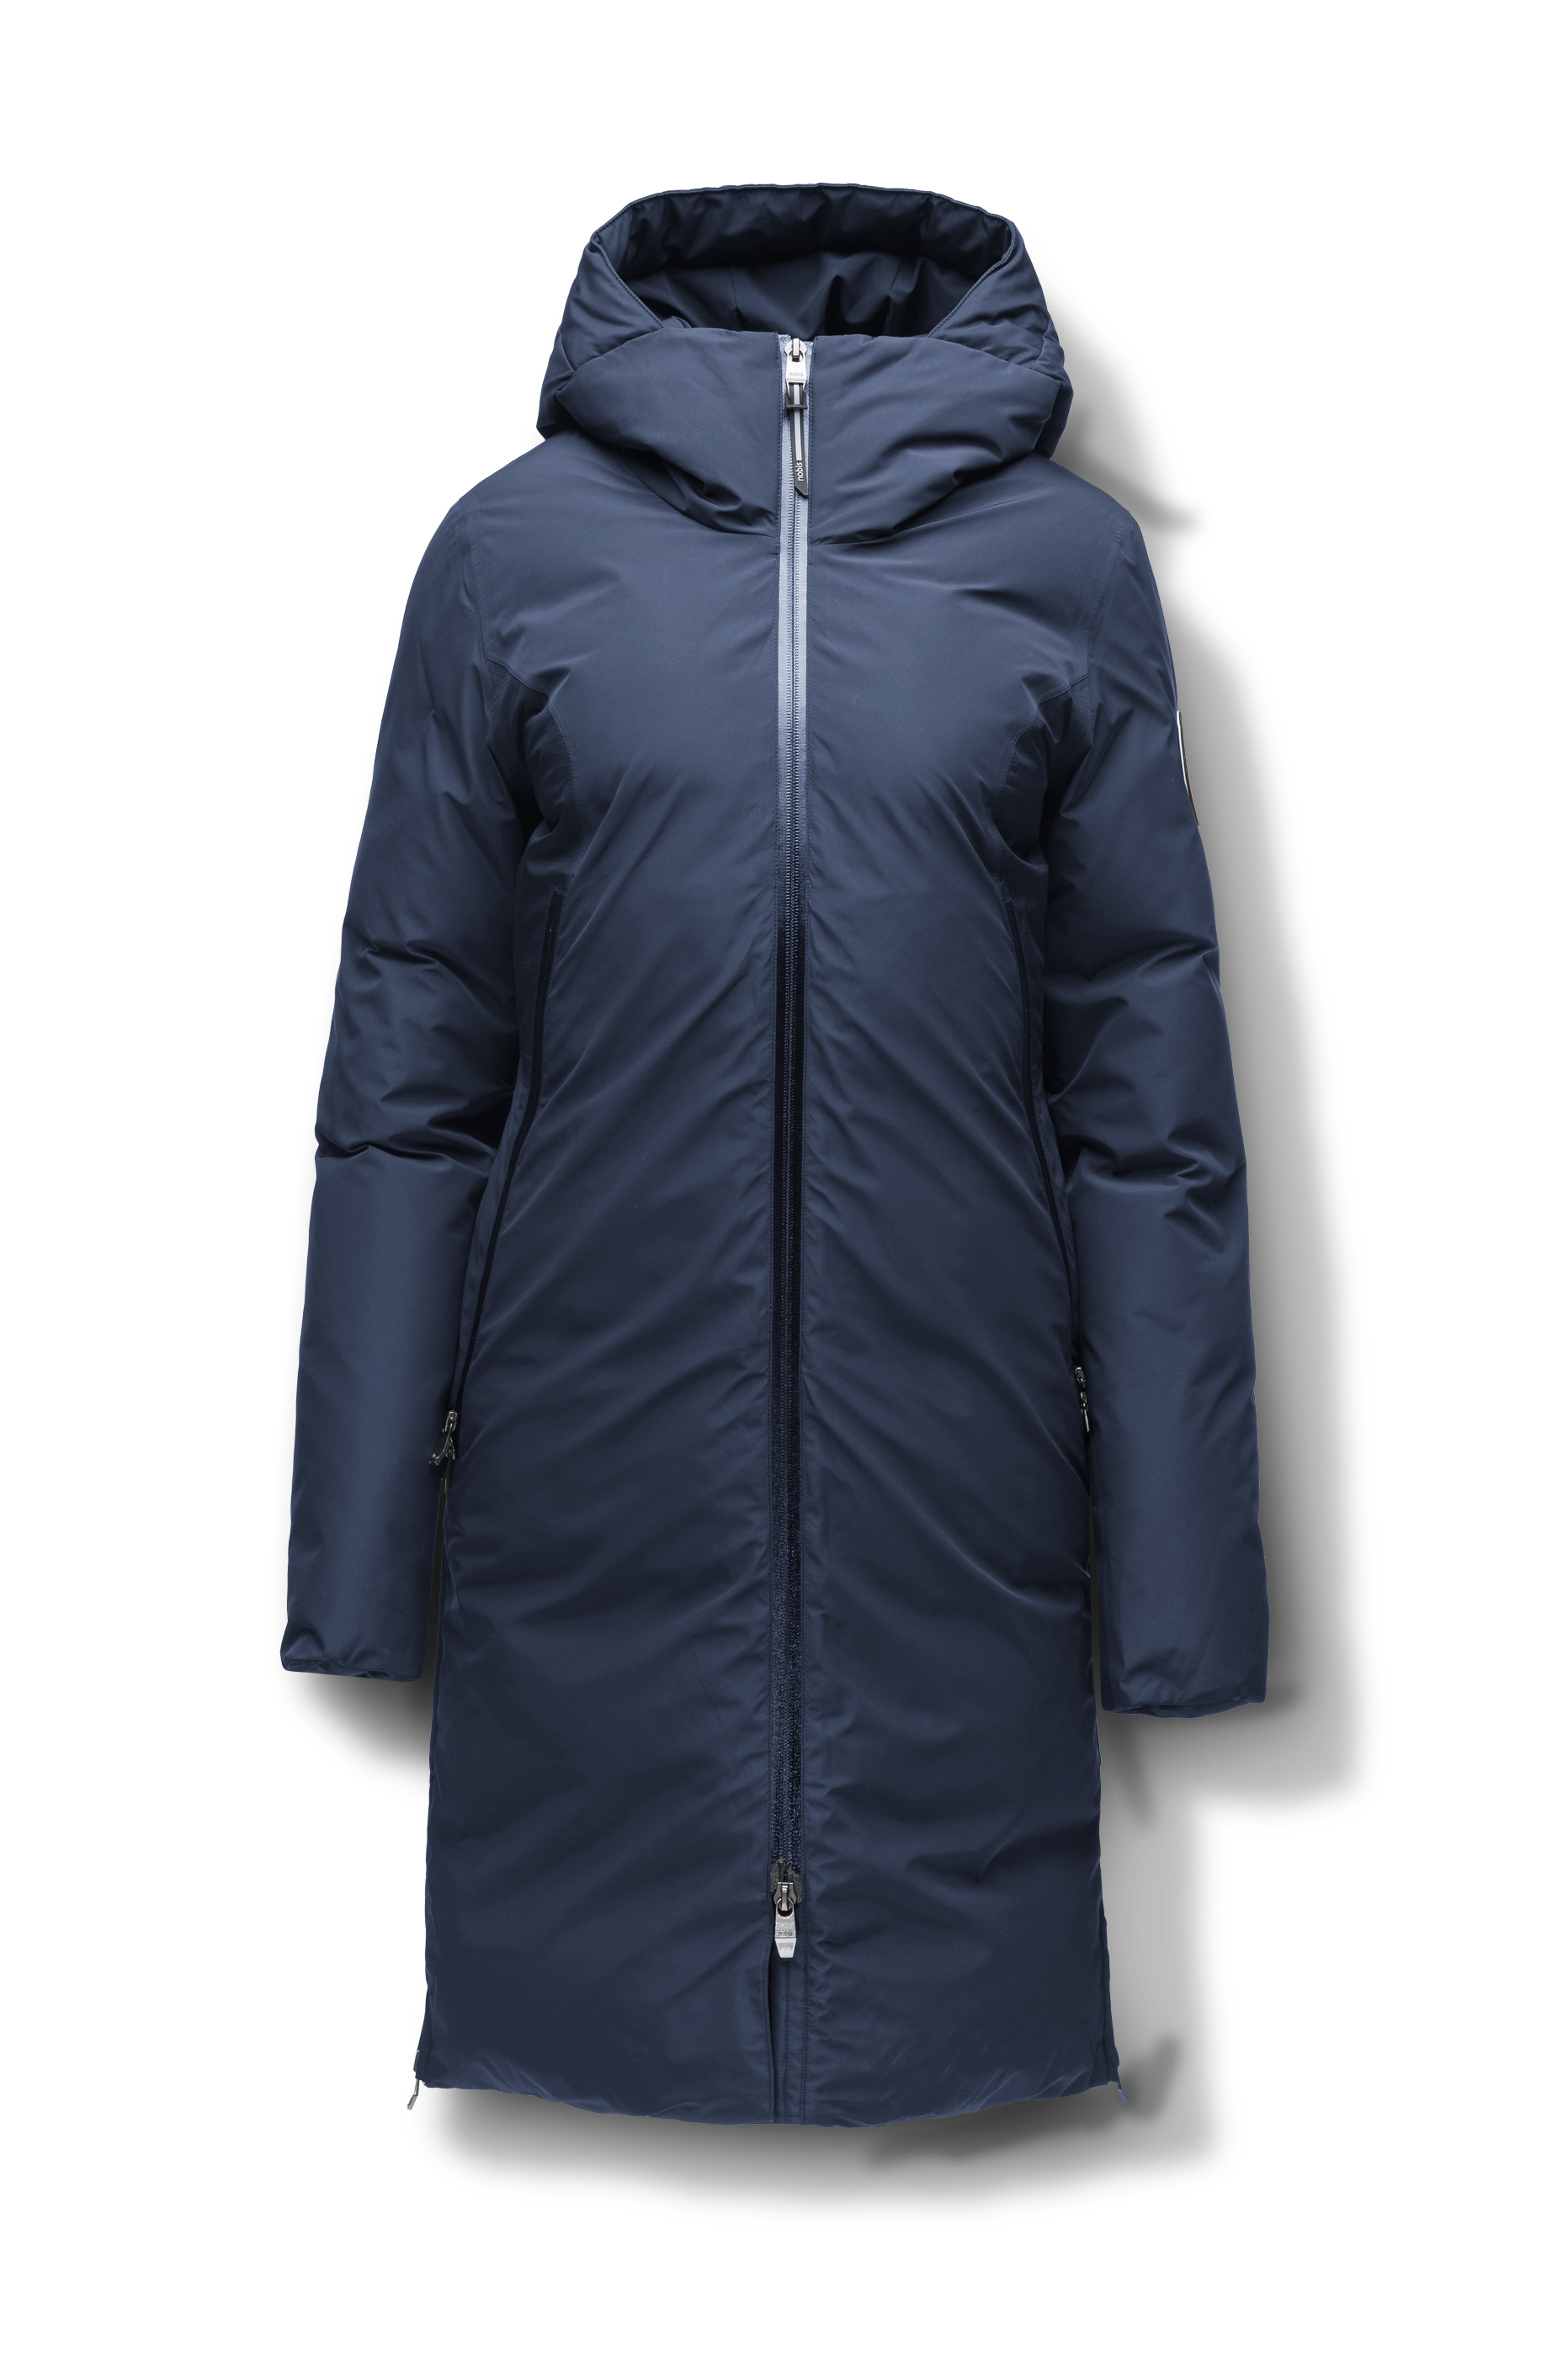 Inara Women's Performance Parka in knee length, premium 3-ply micro denier and stretch ripstop fabrication with DWR coating, Premium Canadian White Duck Down insulation, non-removable down-filled hood, centre front two-way zipper, large vertical zipper pockets along waist, zipper vents along bottom side hem, in Marine